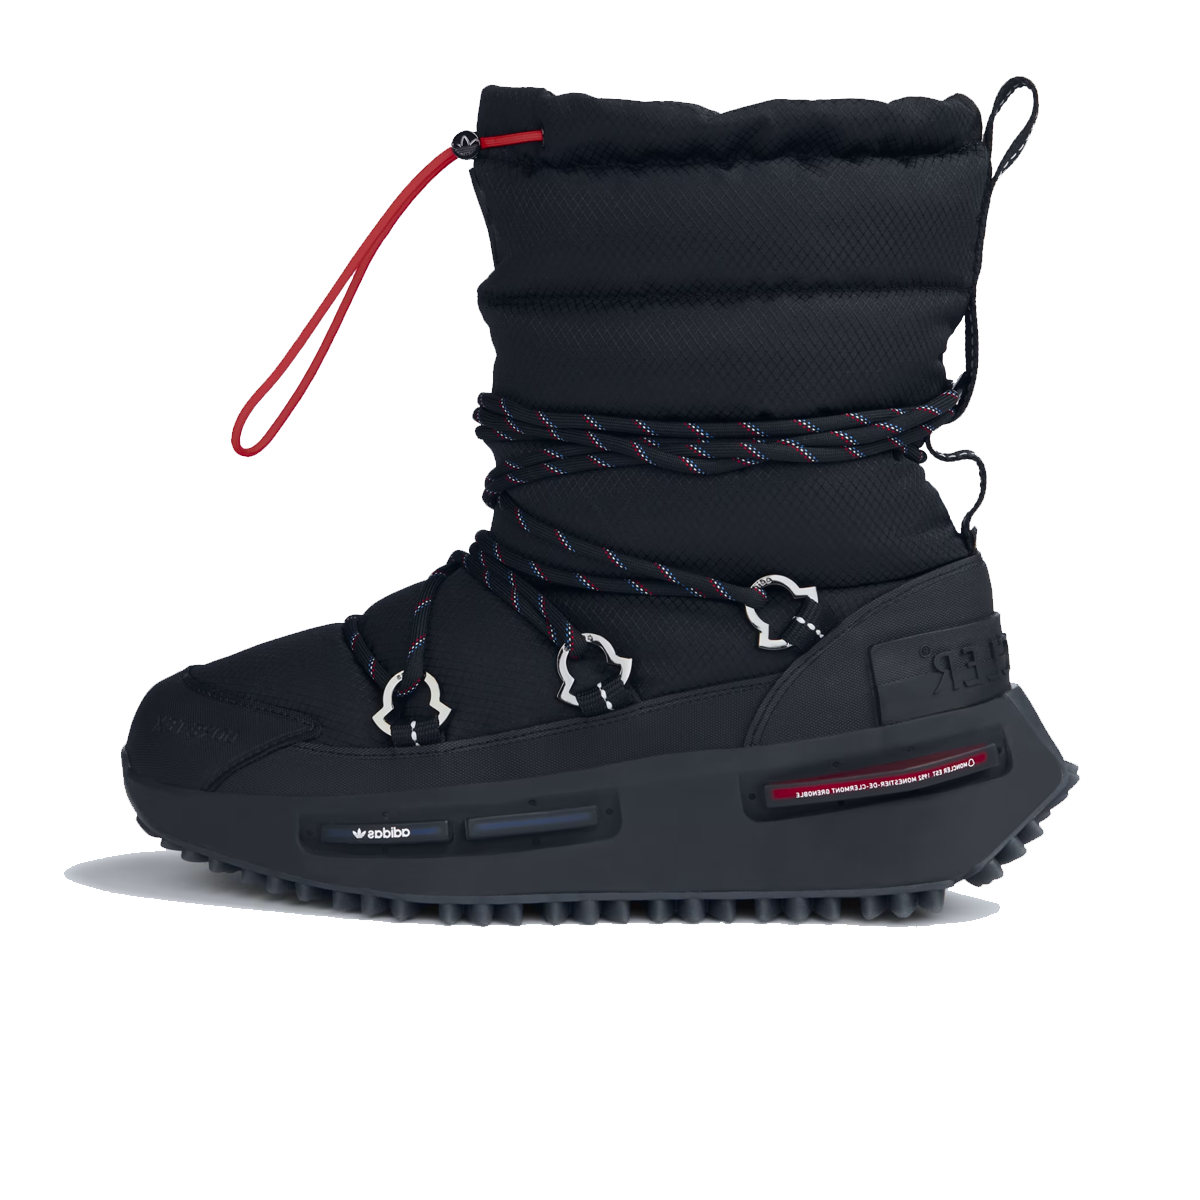 Moncler x adidas NMD Mid 'Core Black'